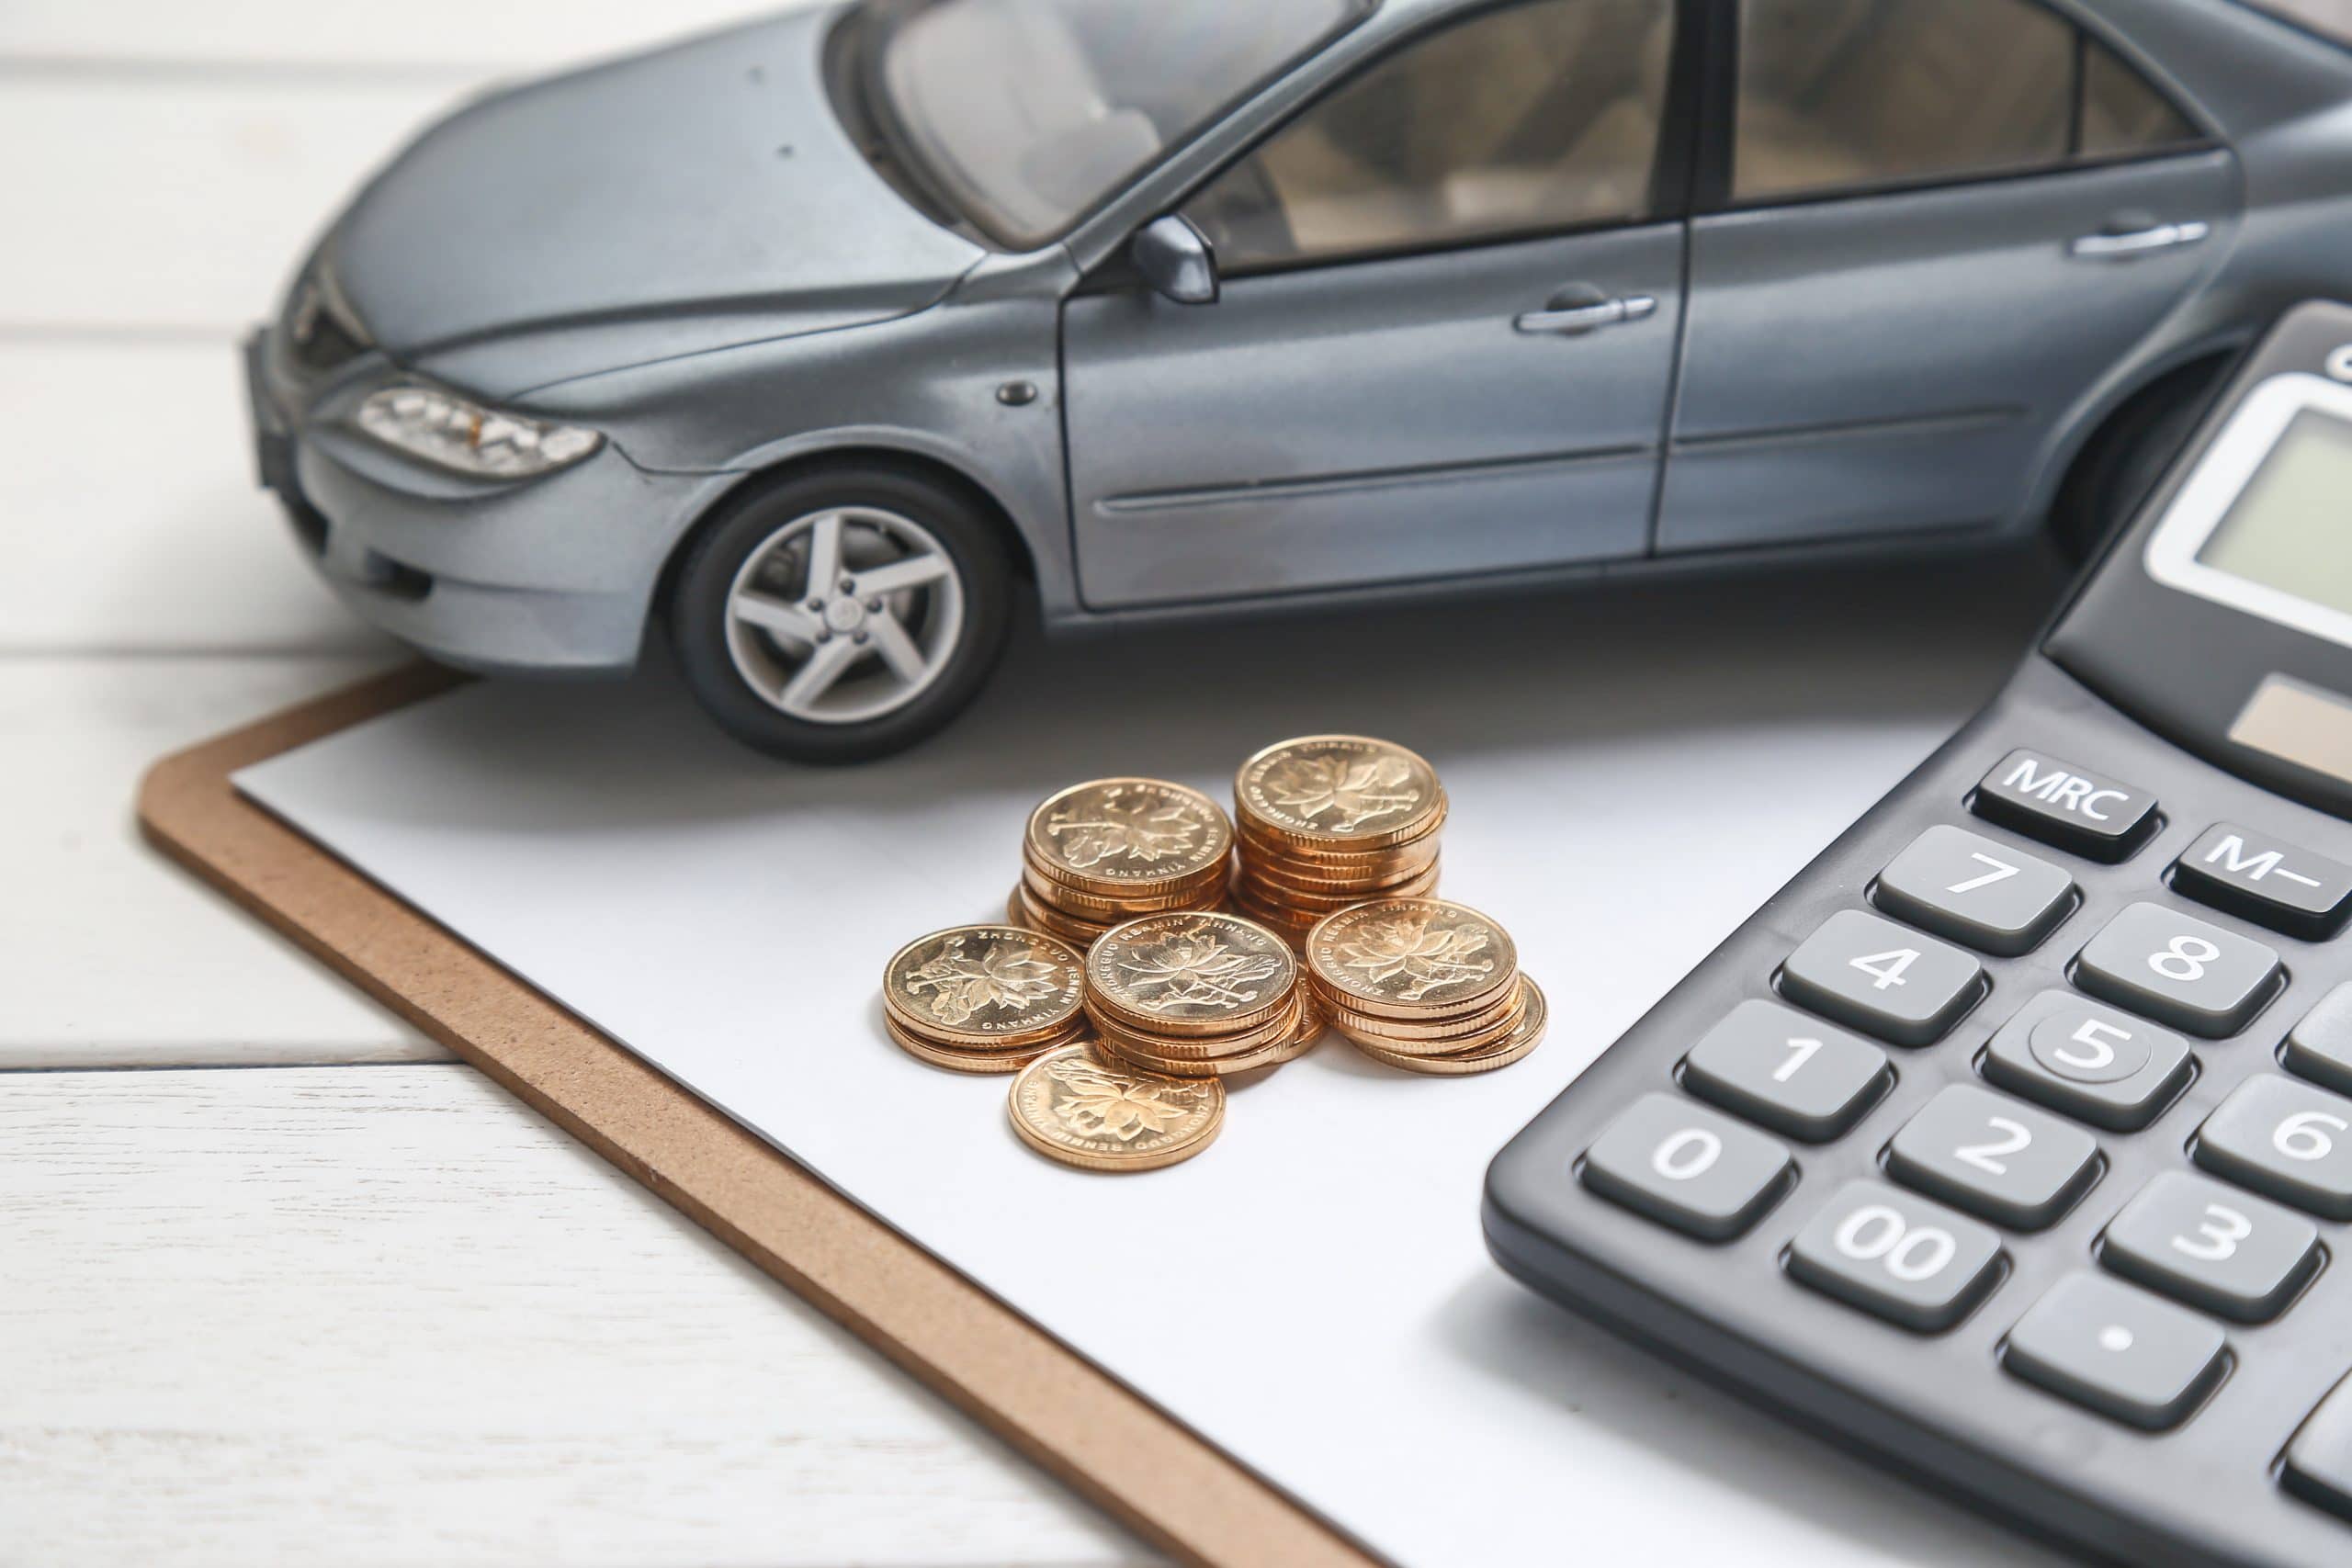 car model,calculator and coins on white table